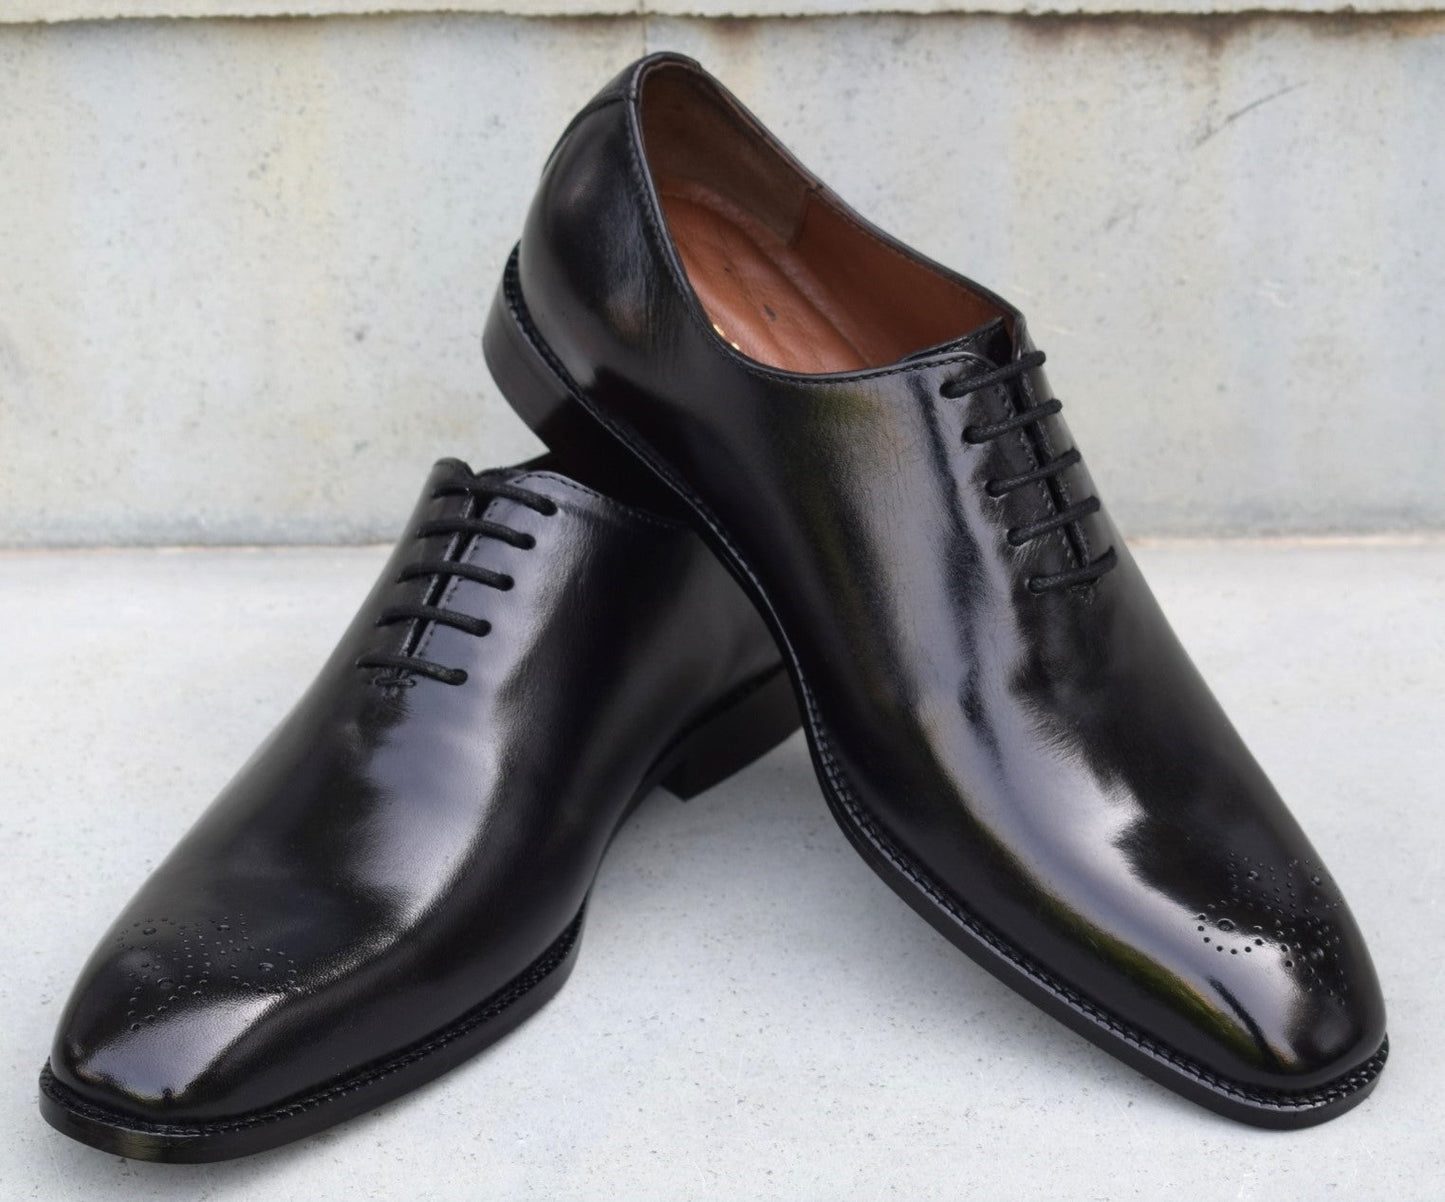 HandPatina Leather Sole Shoes - Clearance